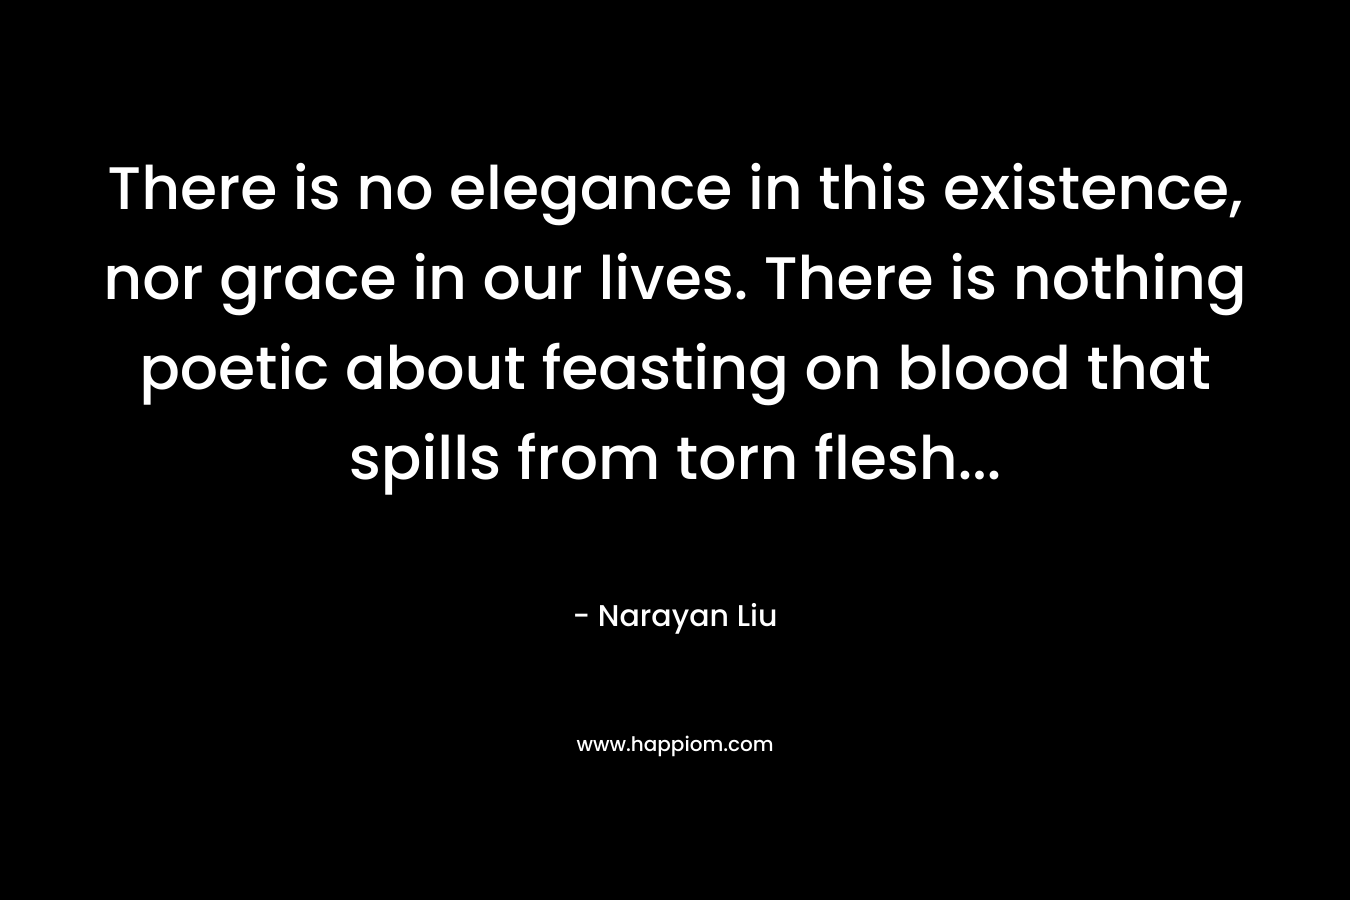 There is no elegance in this existence, nor grace in our lives. There is nothing poetic about feasting on blood that spills from torn flesh...